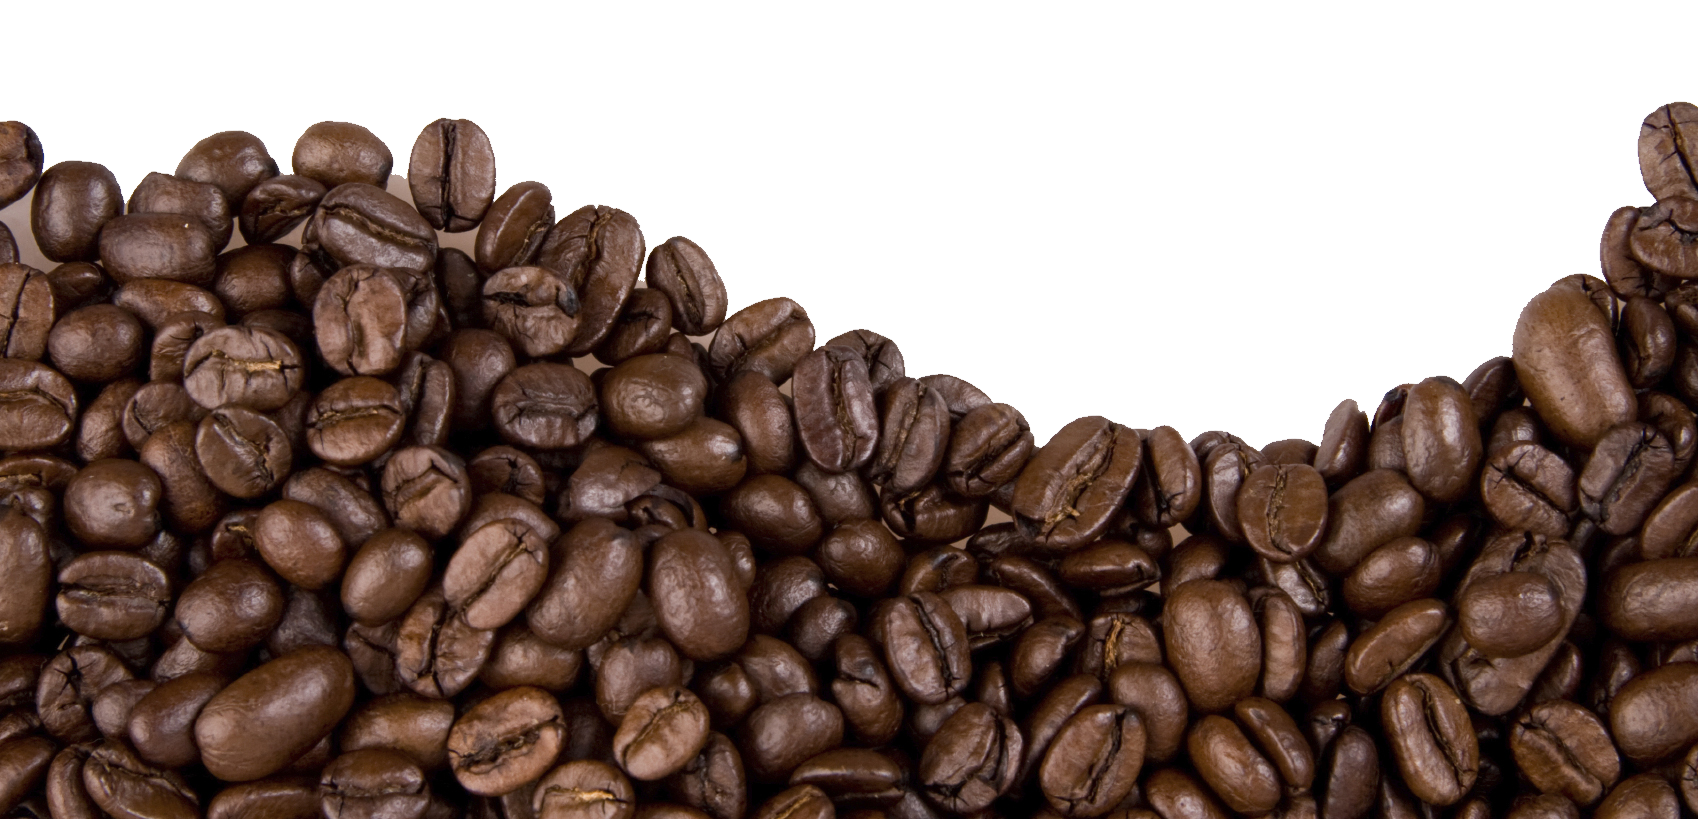 Vector Realistic Coffee Beans Stock Illustration - Download Image